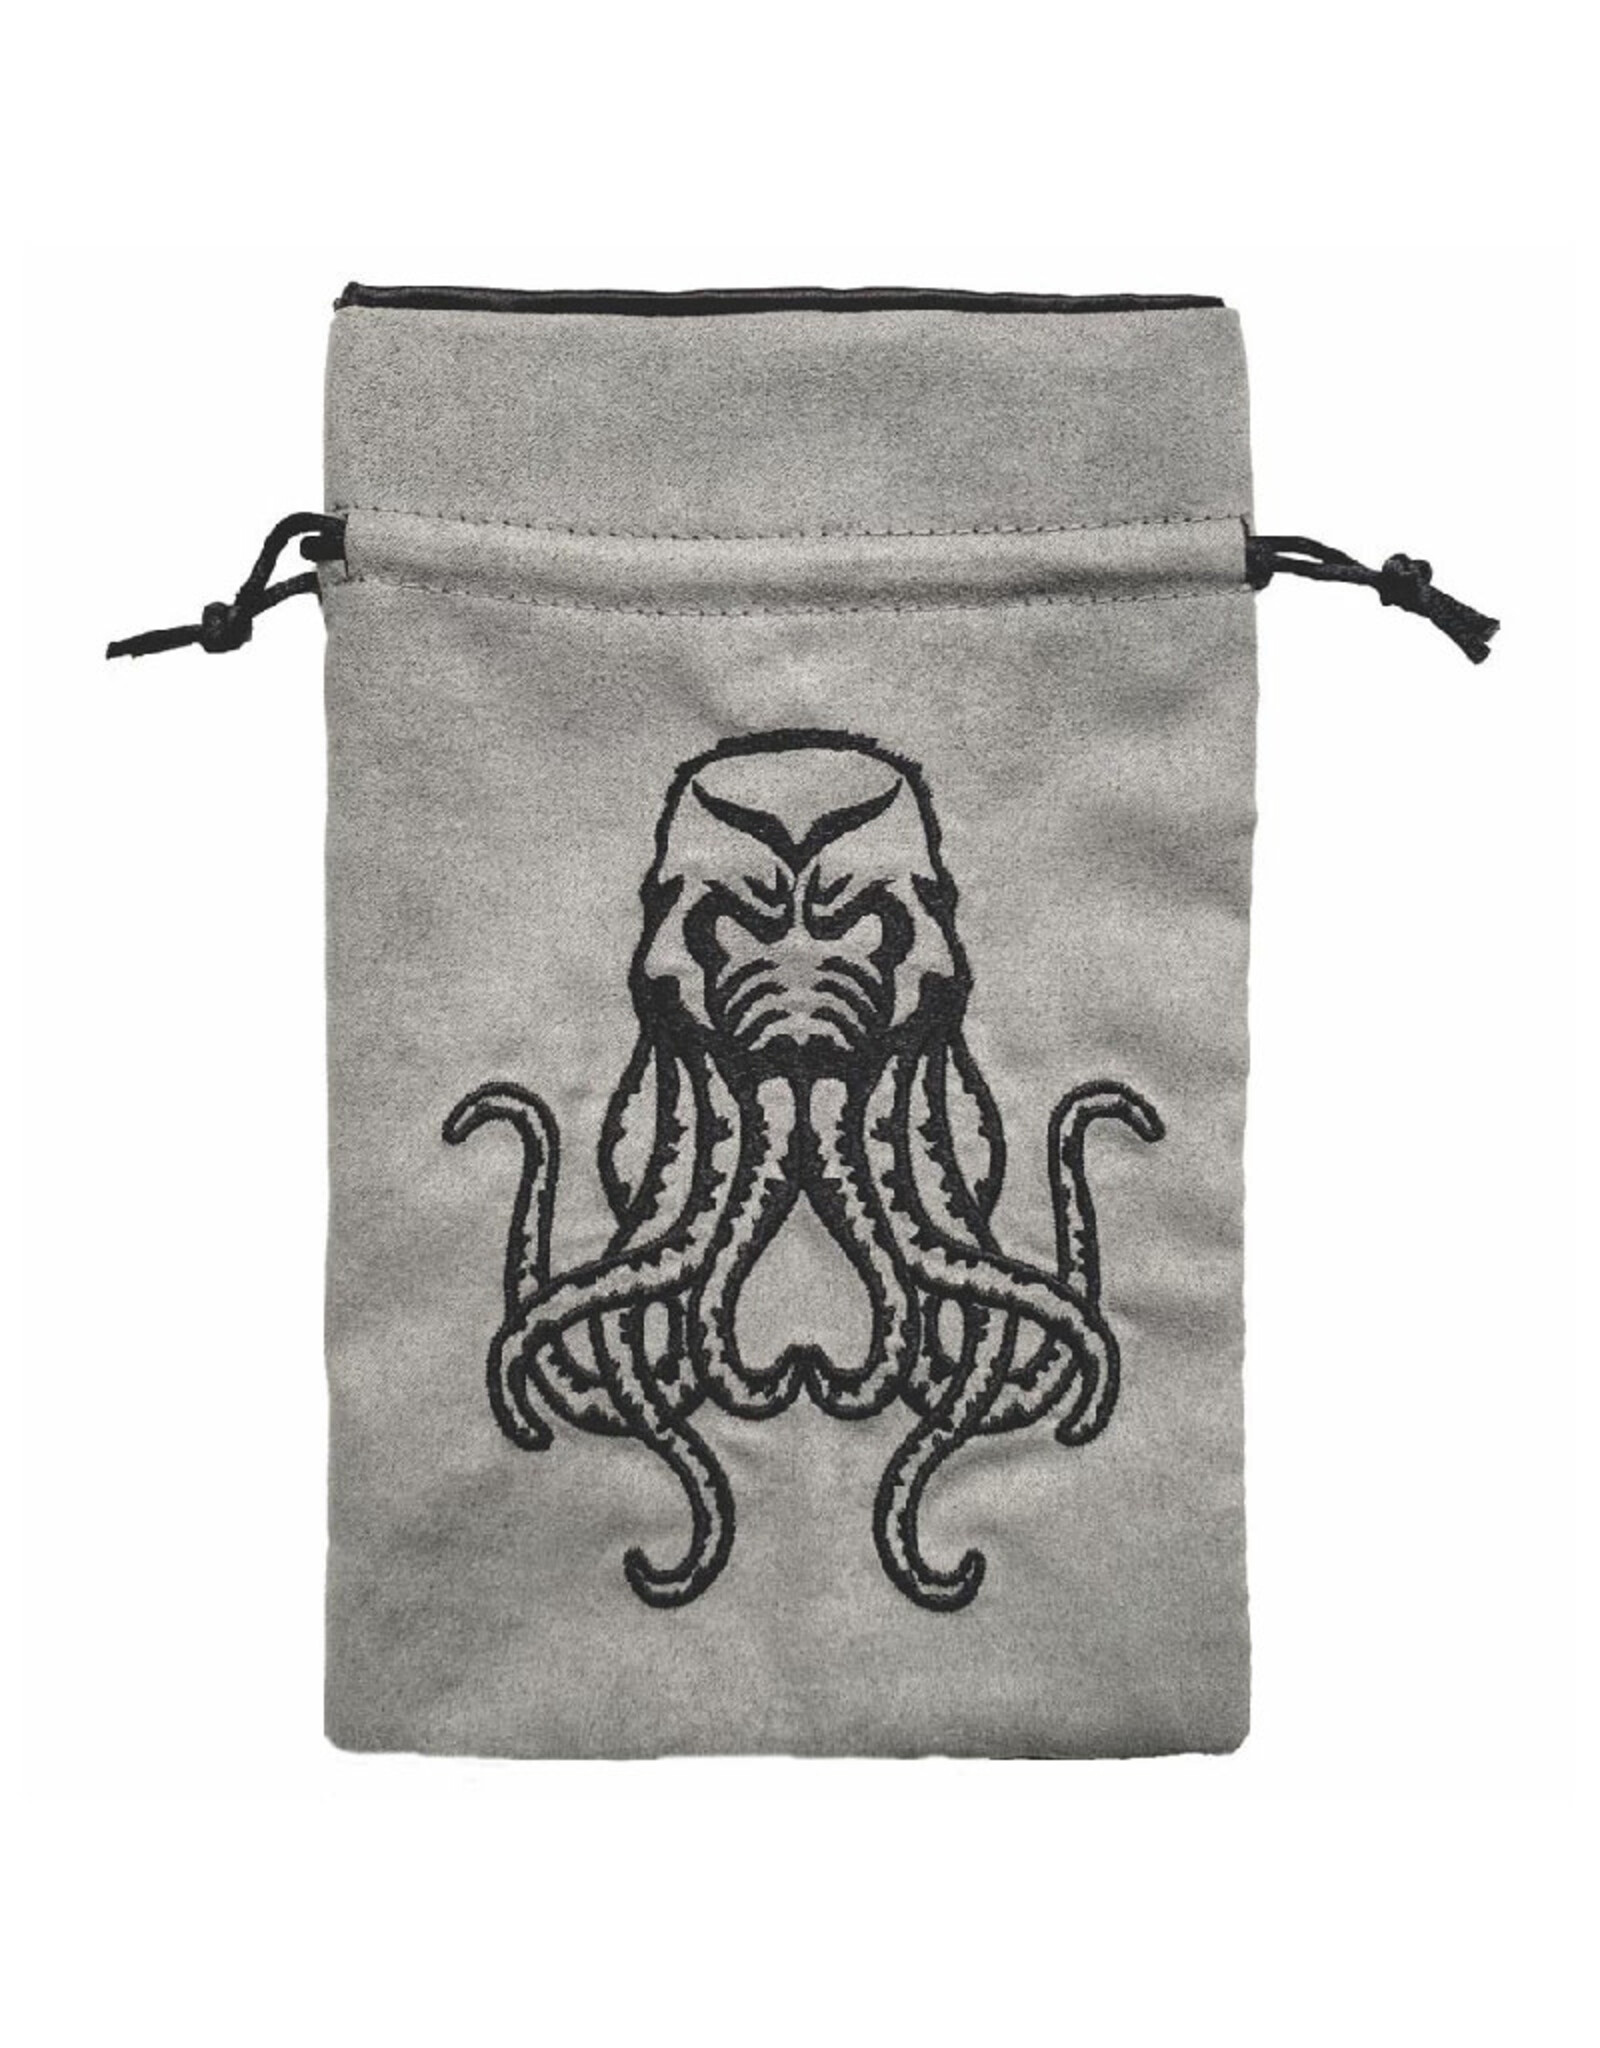 Misc Dice Bag: Mighty Cthulhu